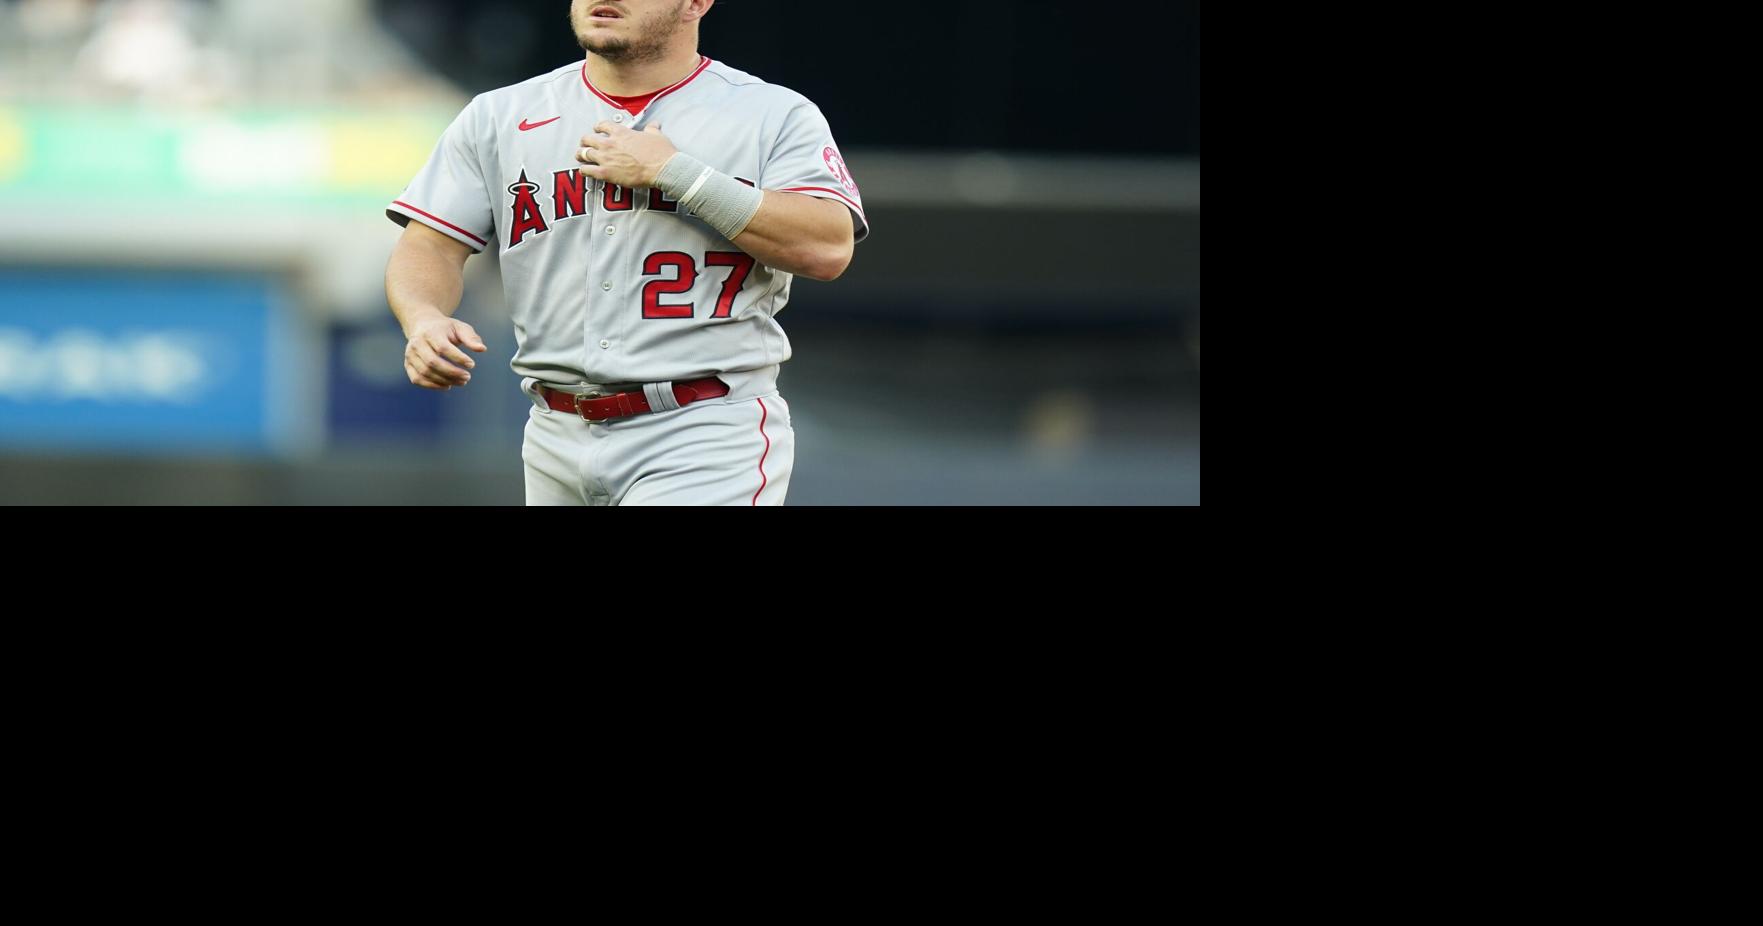 Daily Mike Trout Report: Singled in return from injury